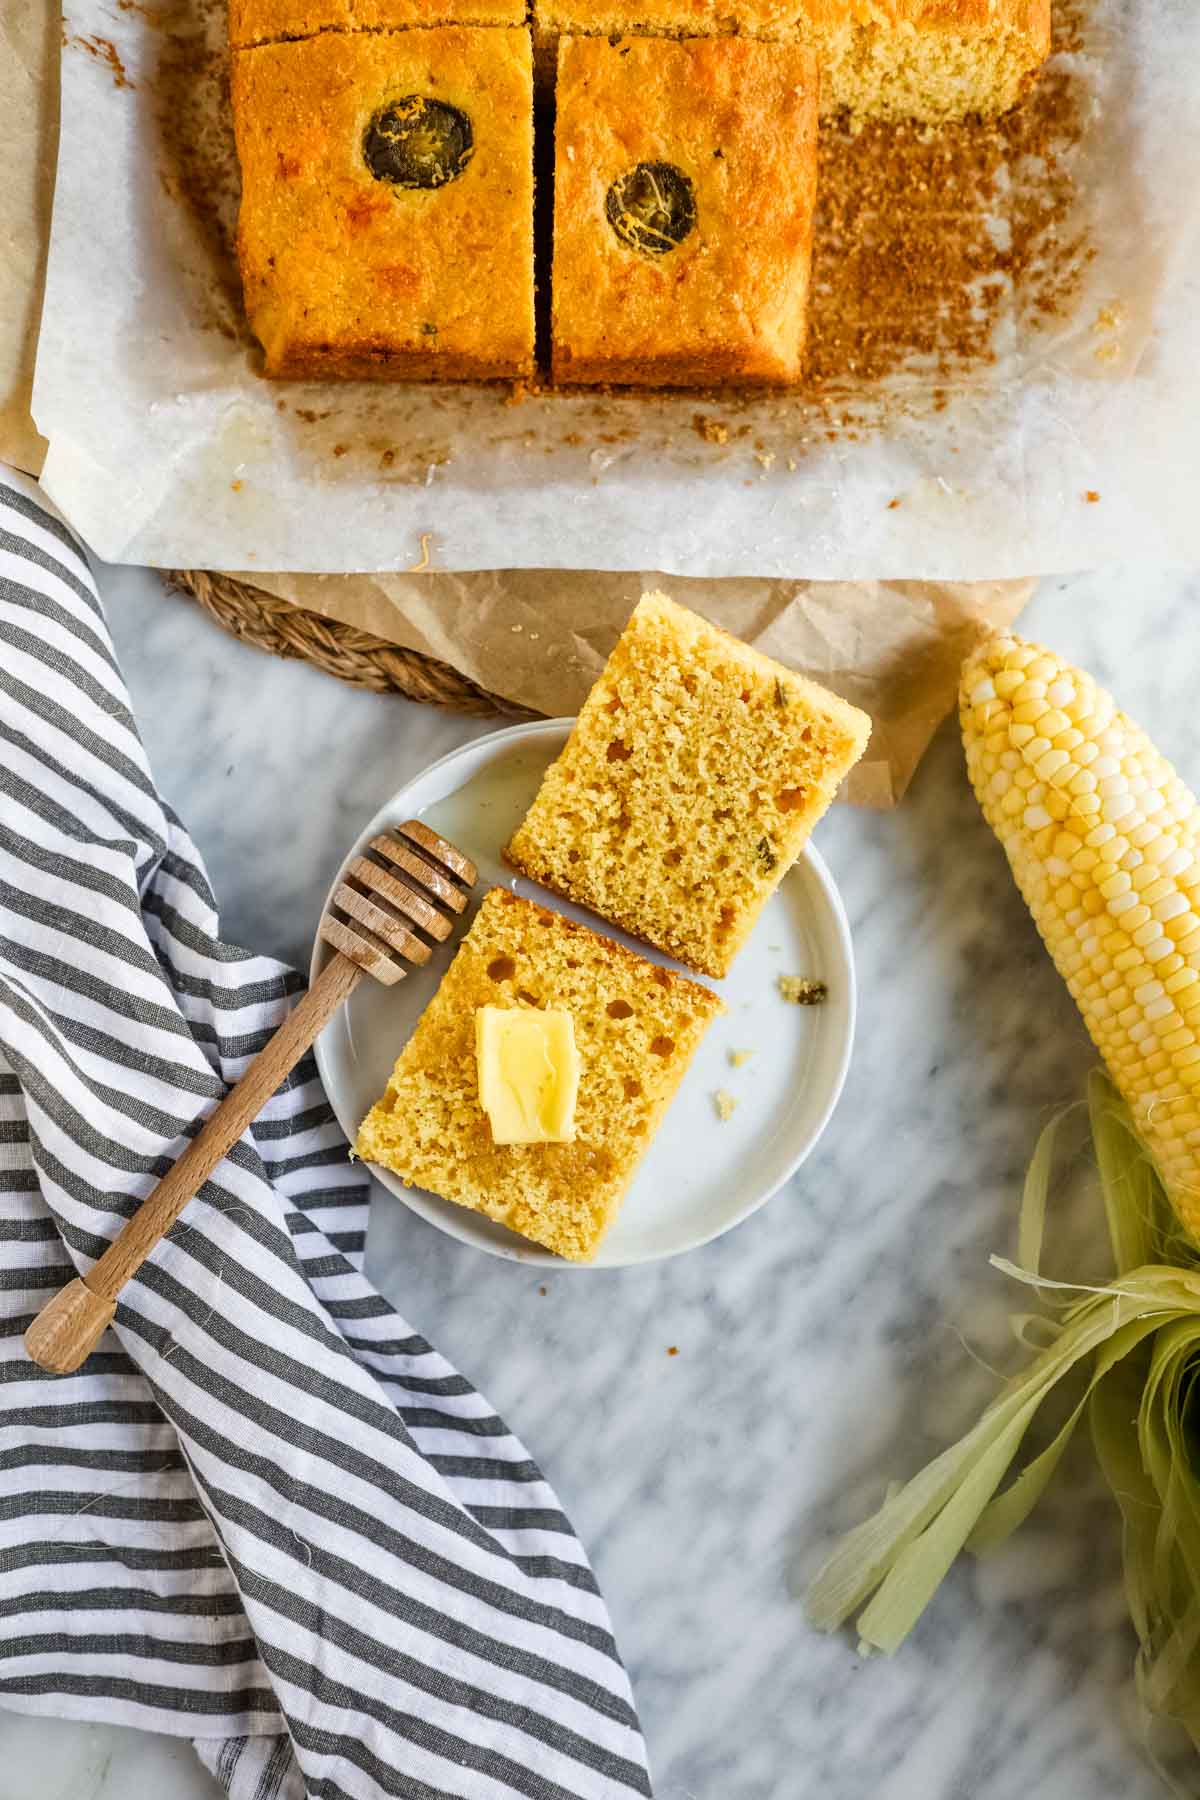 Jalapeño Cheddar Cornbread with Miso sliced on plate with butter and corn husk.